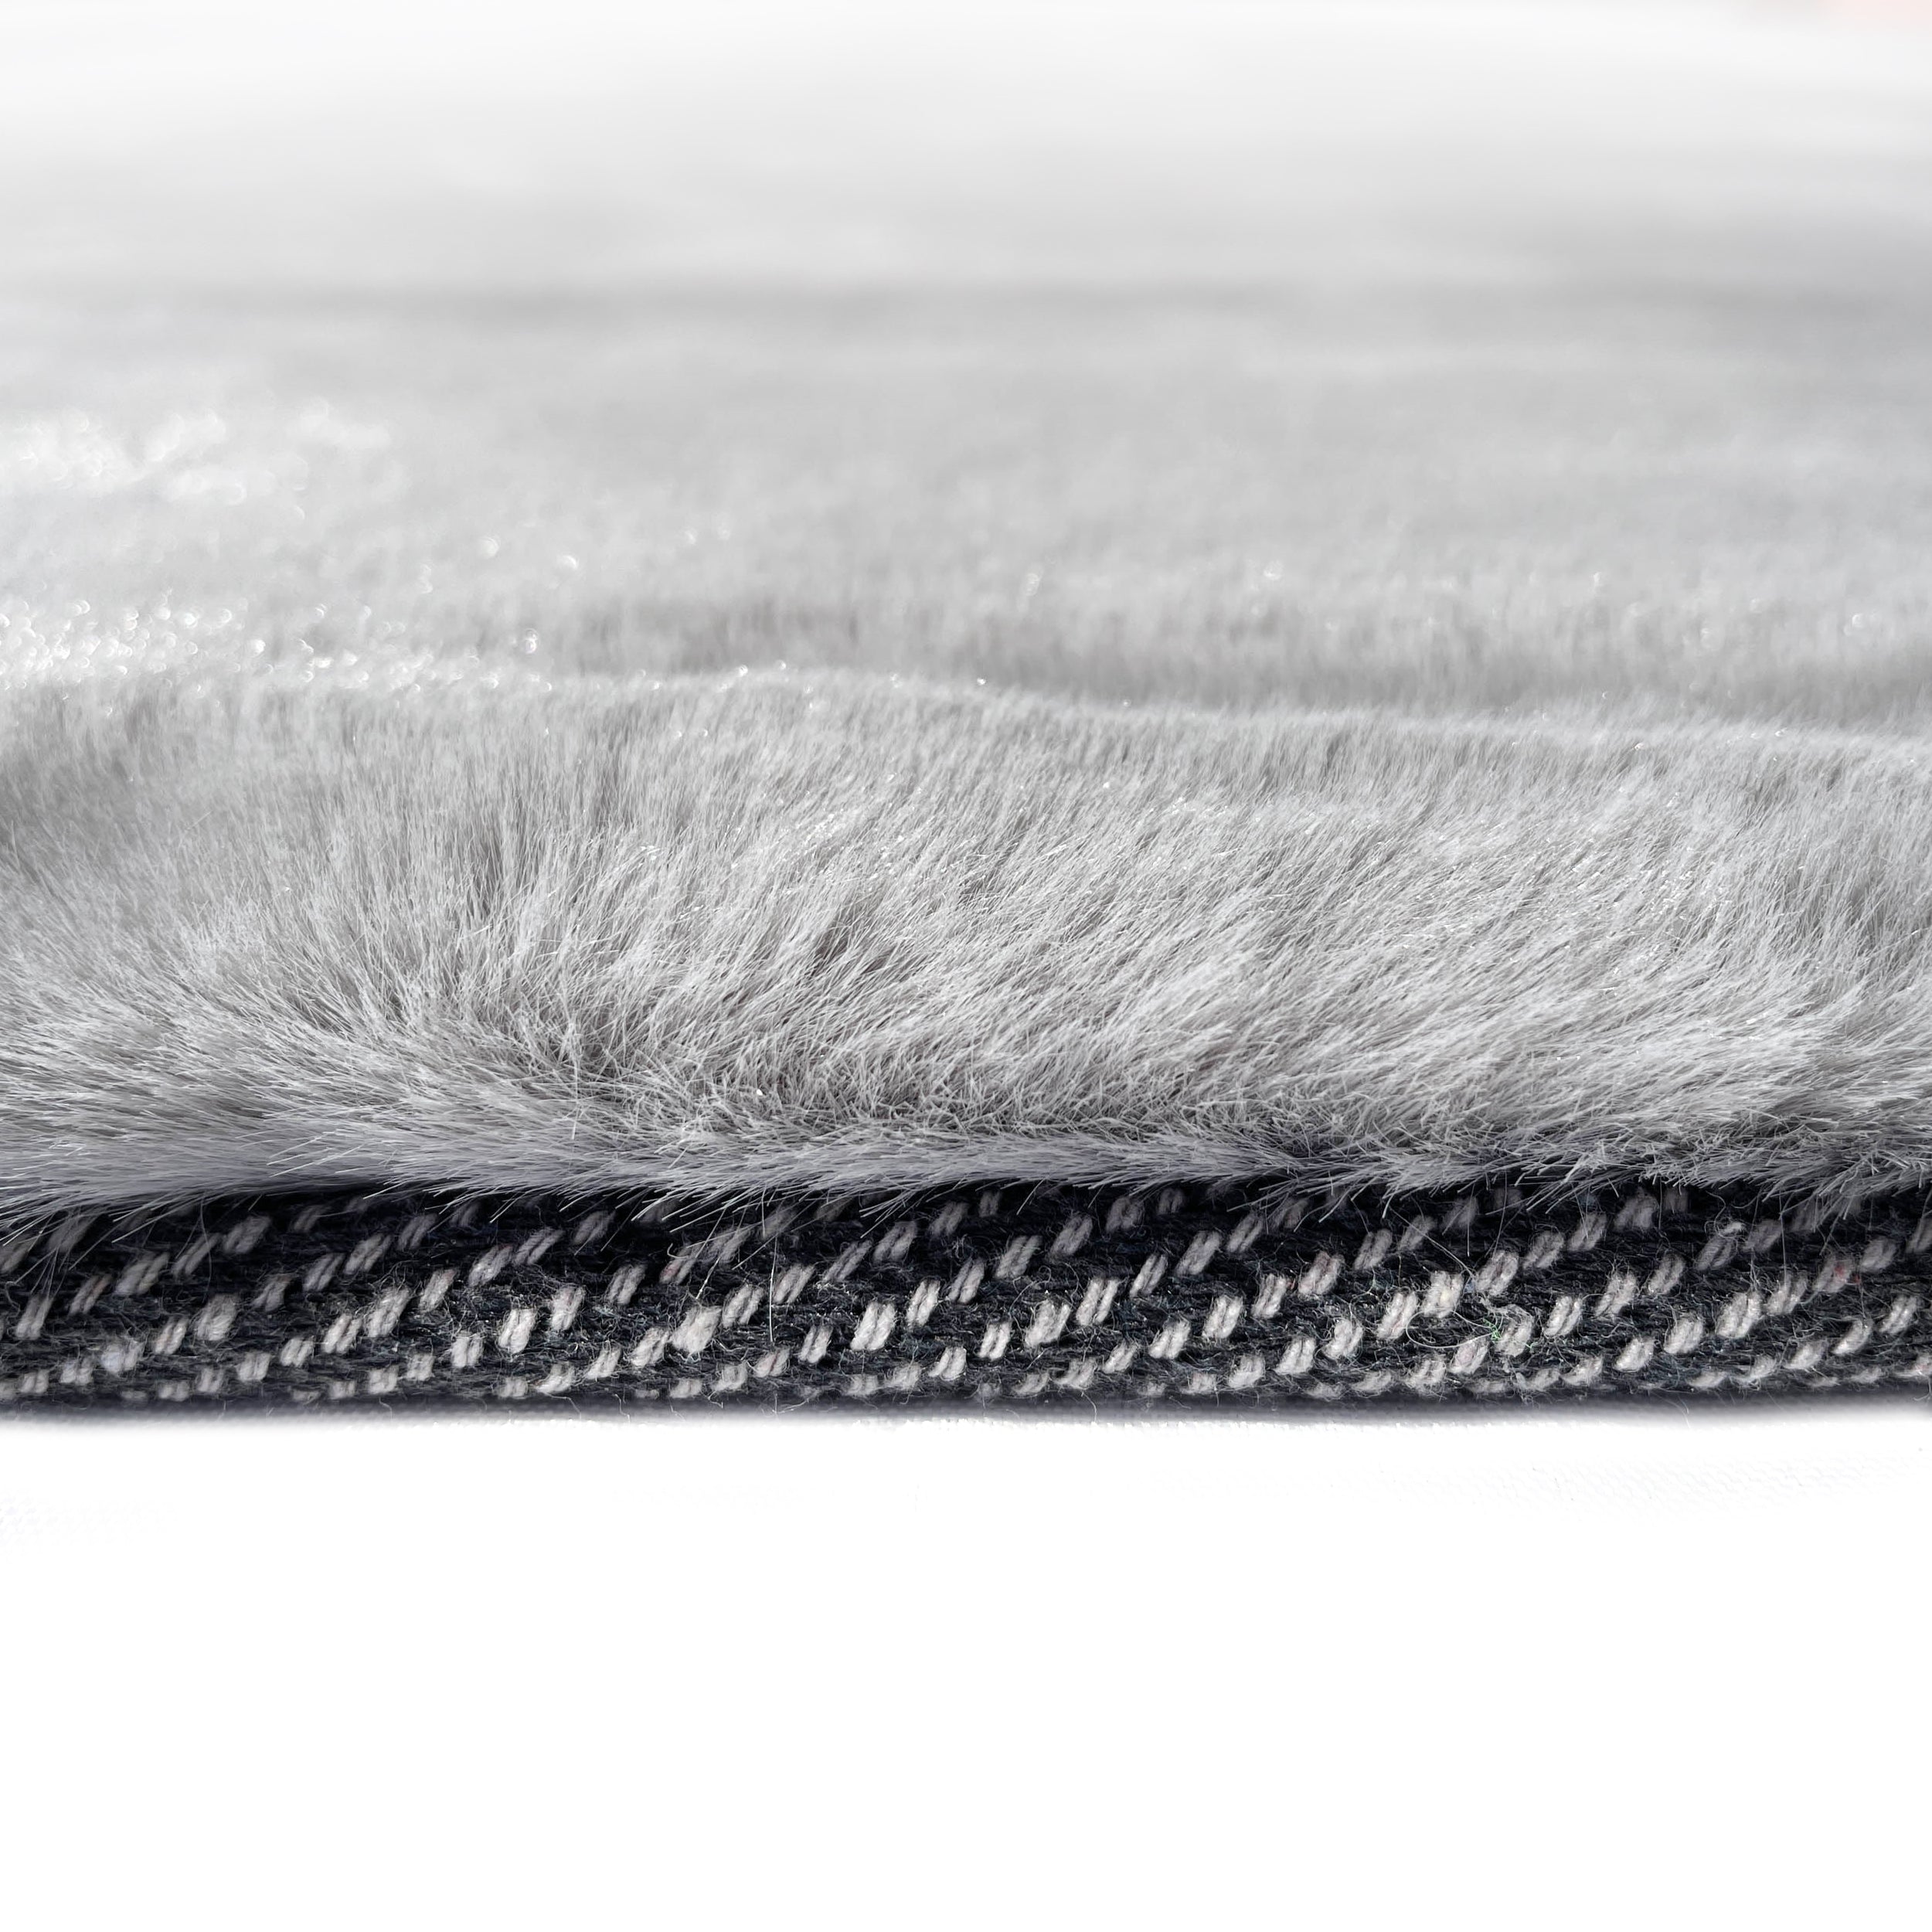 Rabbit Smoke Gray Faux Fur Area Rug - Plush and luxurious smoke gray faux fur rectangular rug from the Rabbit collection by LA Rug Linens. Available in various sizes. Made of polyester. Perfect for adding warmth and elegance to any room in your home.